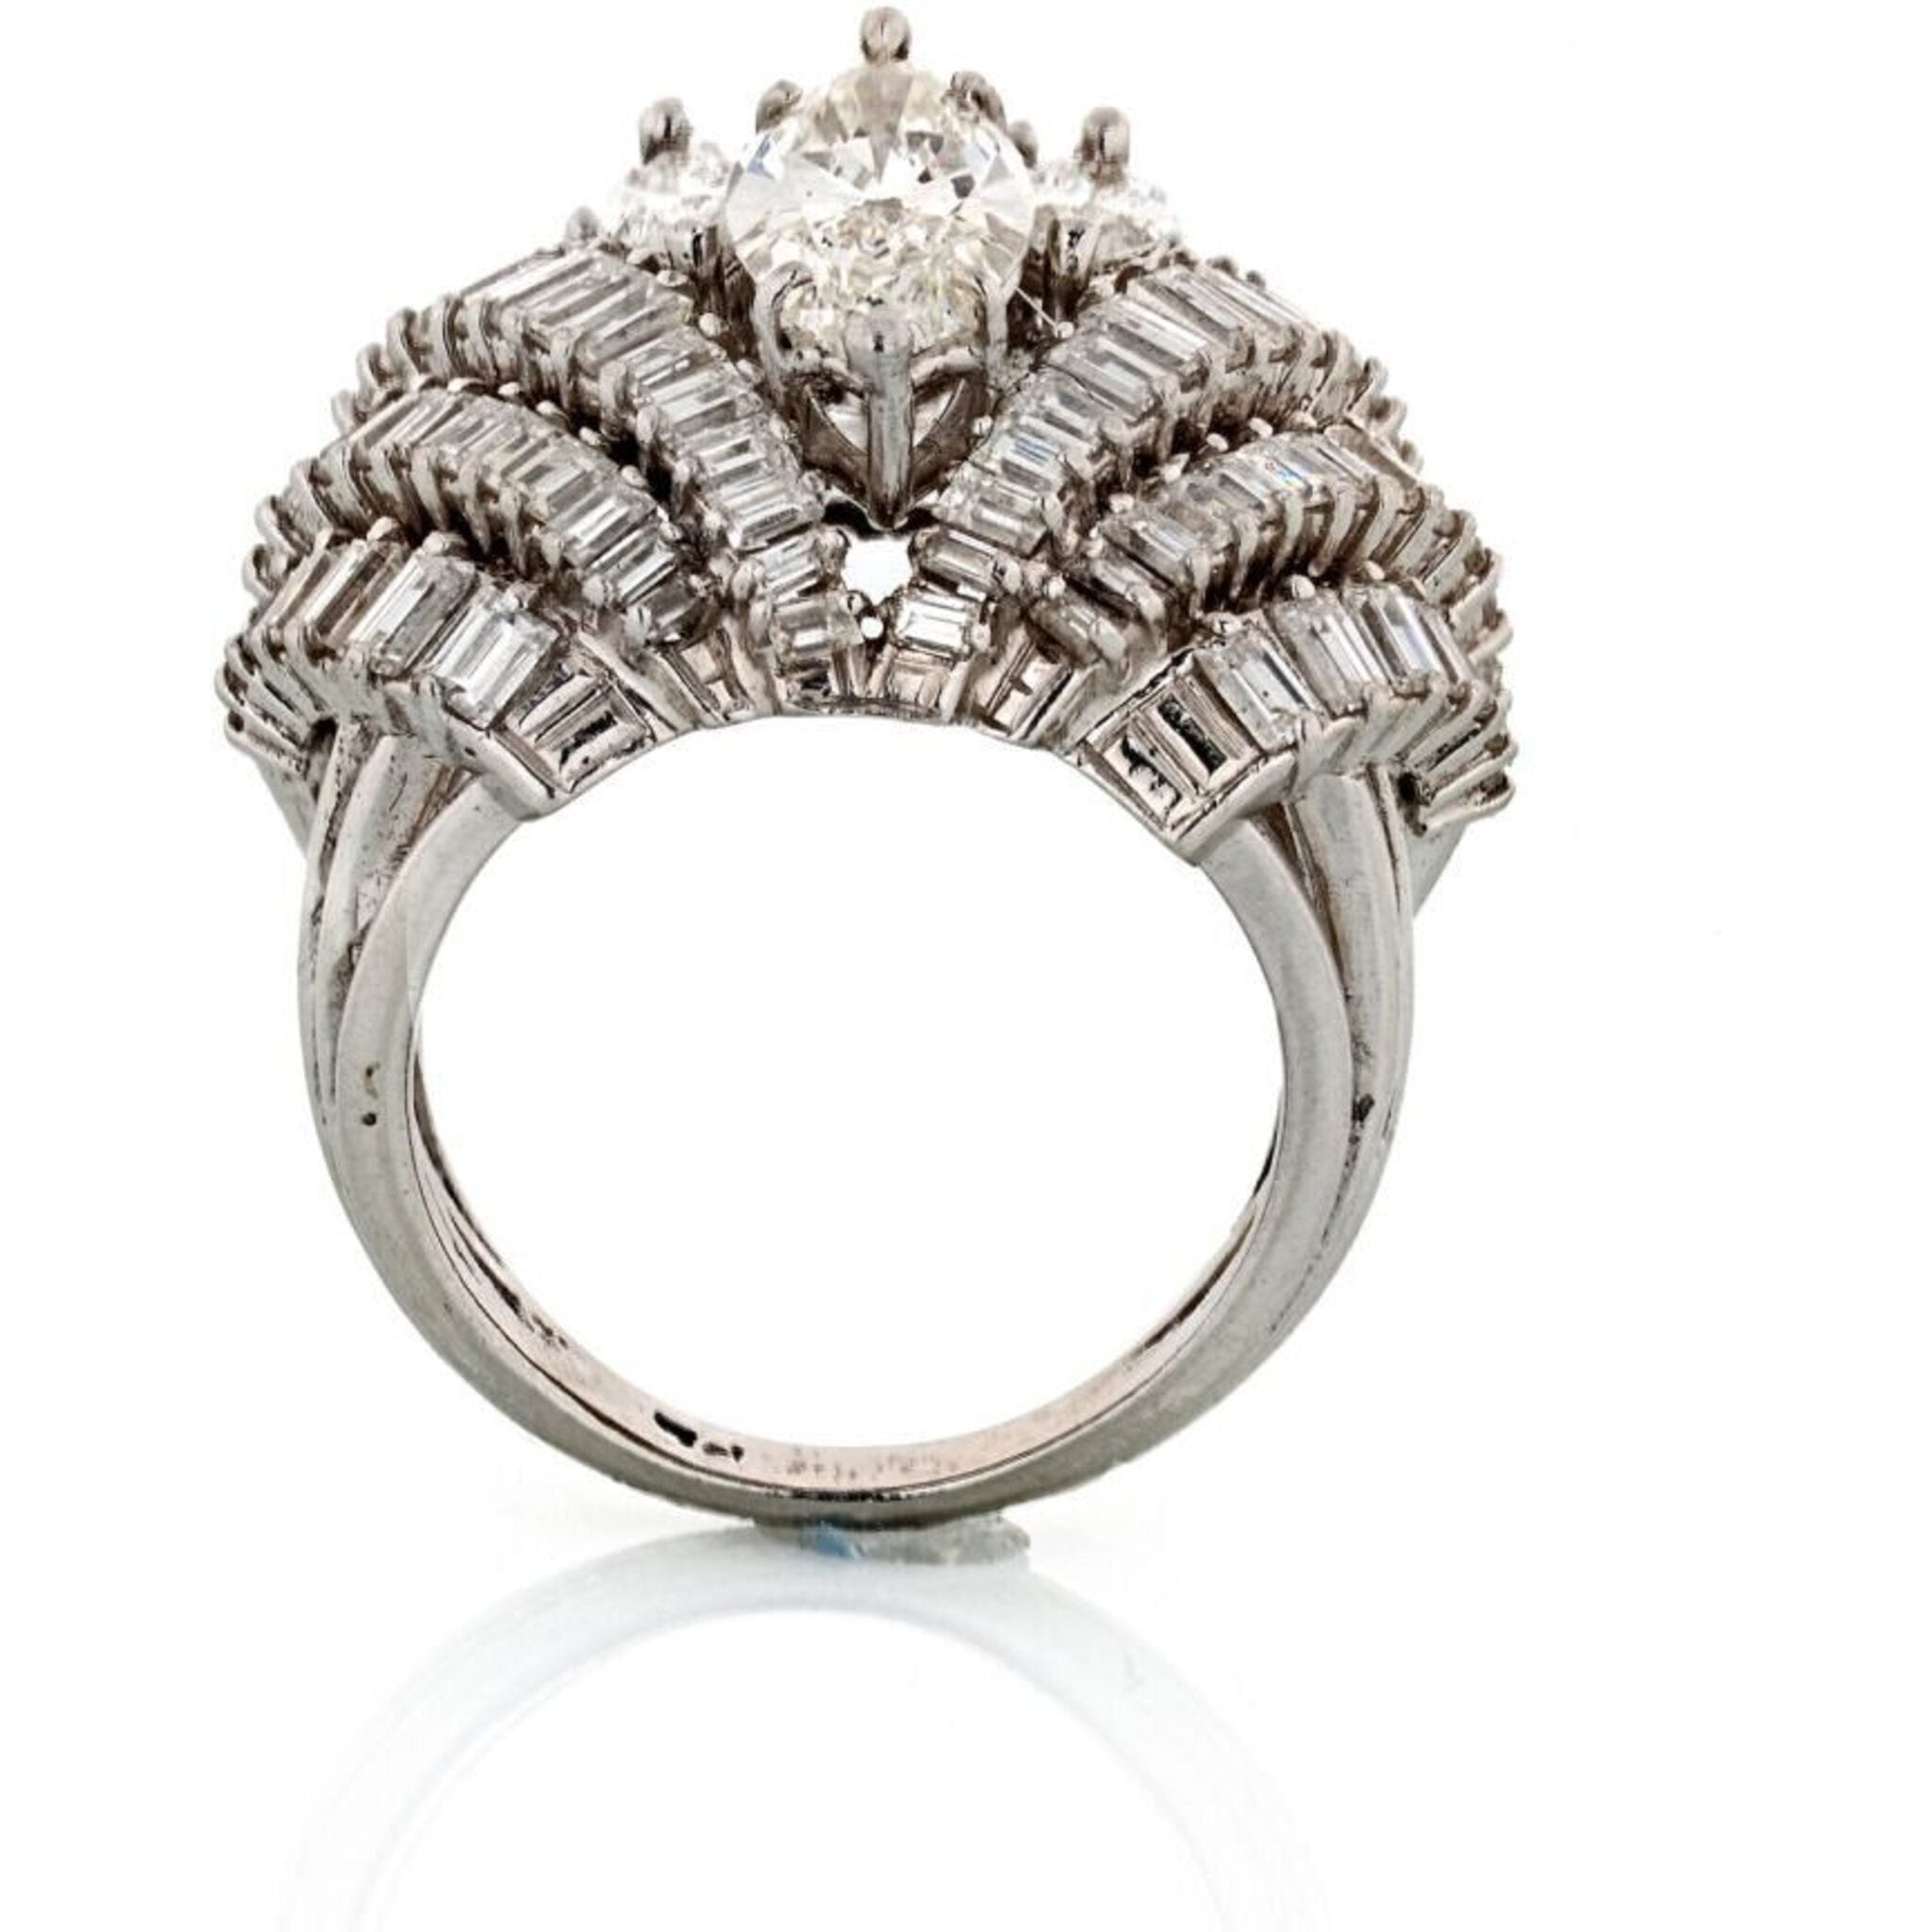 Buy 1.2 Carat Solitaire Cocktail Ring, Engagement Ring Online: Attrangi